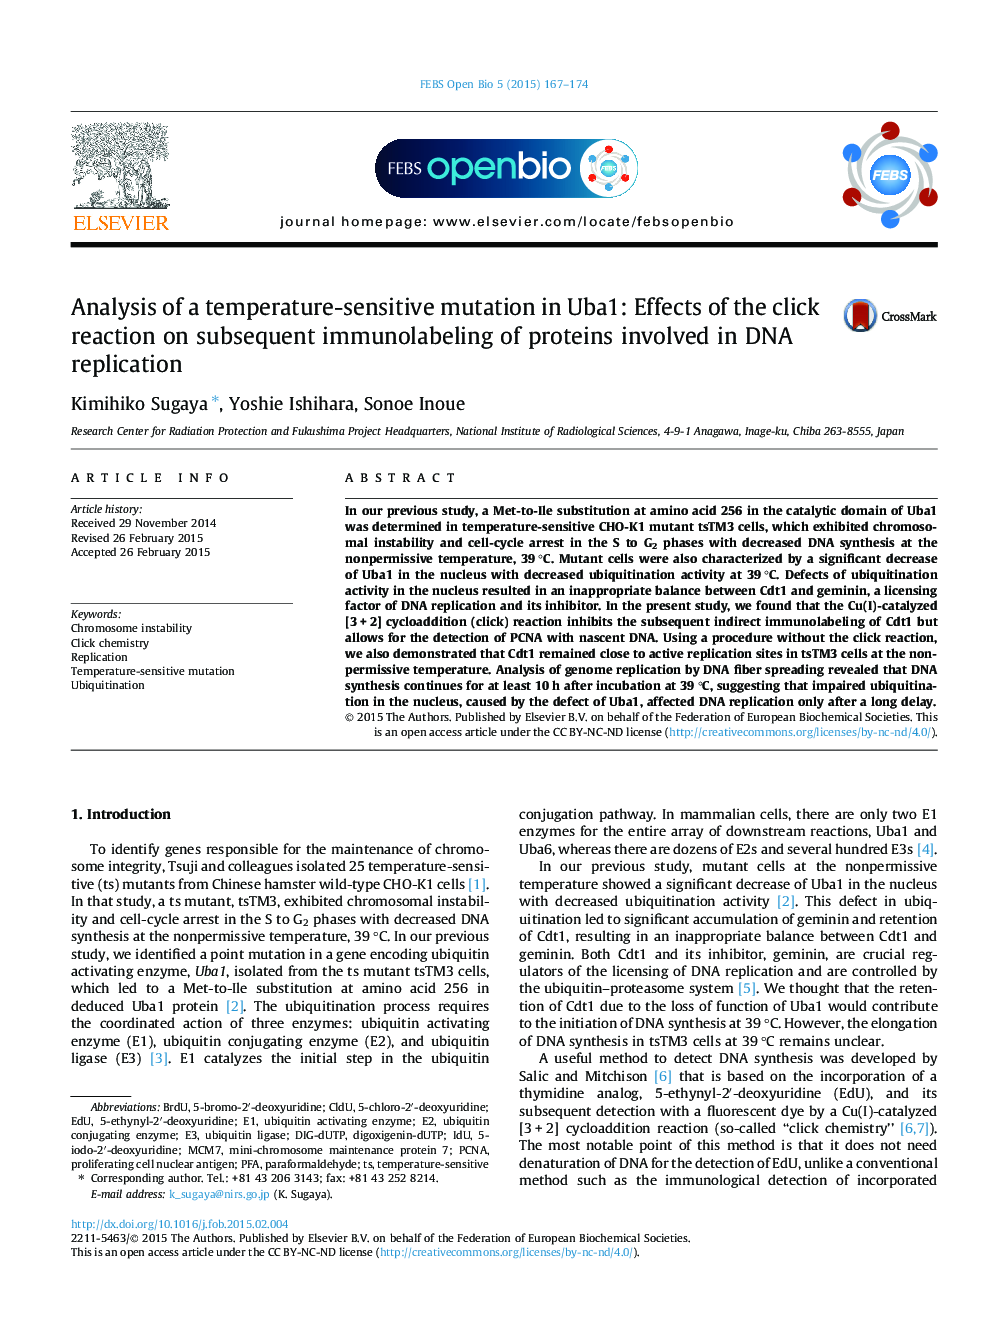 Analysis of a temperature-sensitive mutation in Uba1: Effects of the click reaction on subsequent immunolabeling of proteins involved in DNA replication